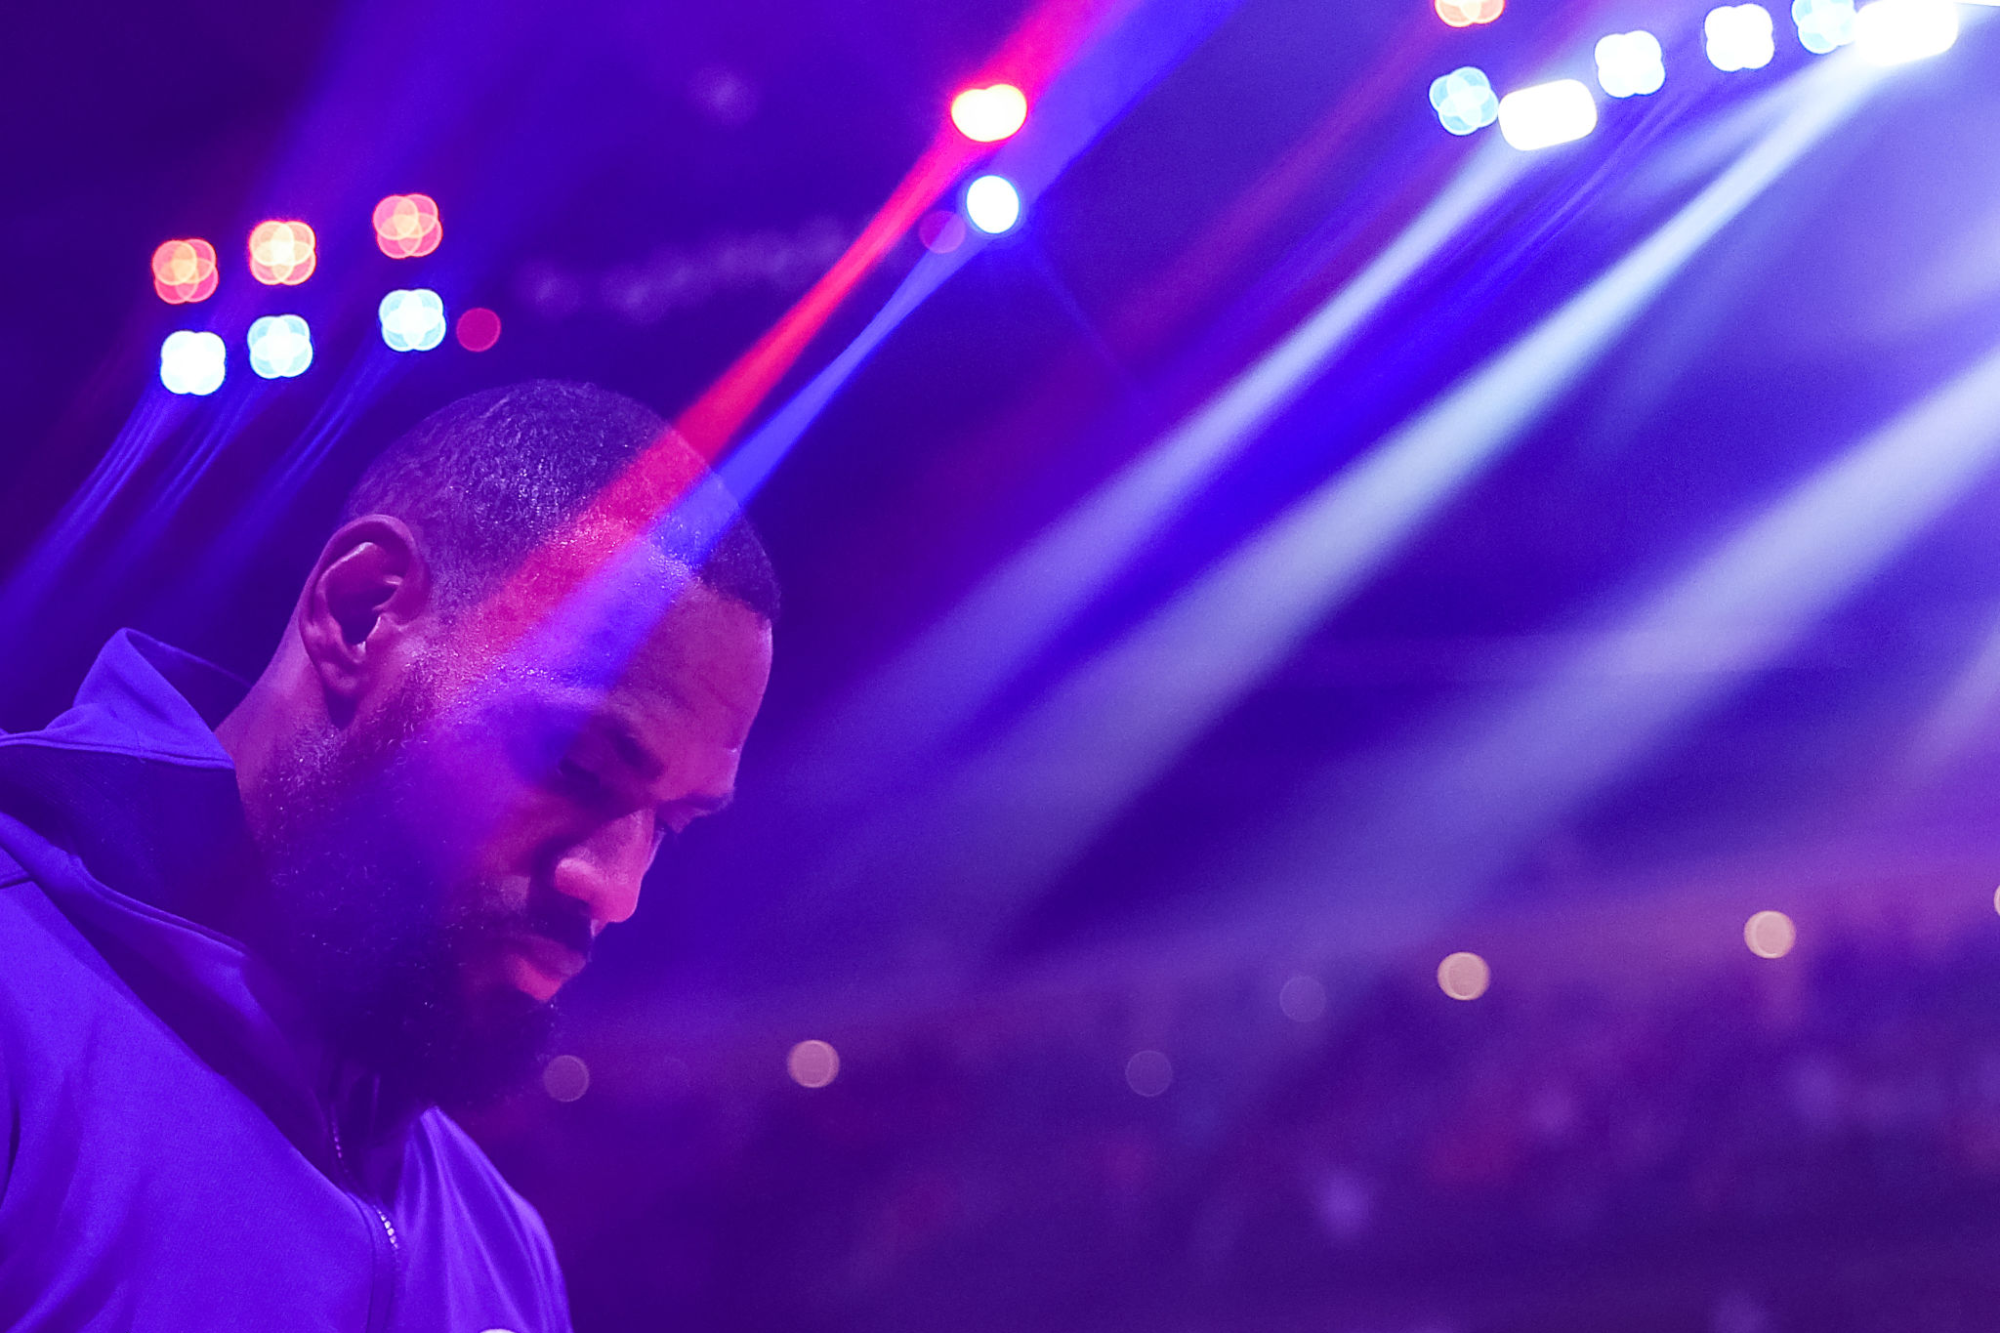 Lakers star LeBron James prepares to face the Houston Rockets on Tuesday.